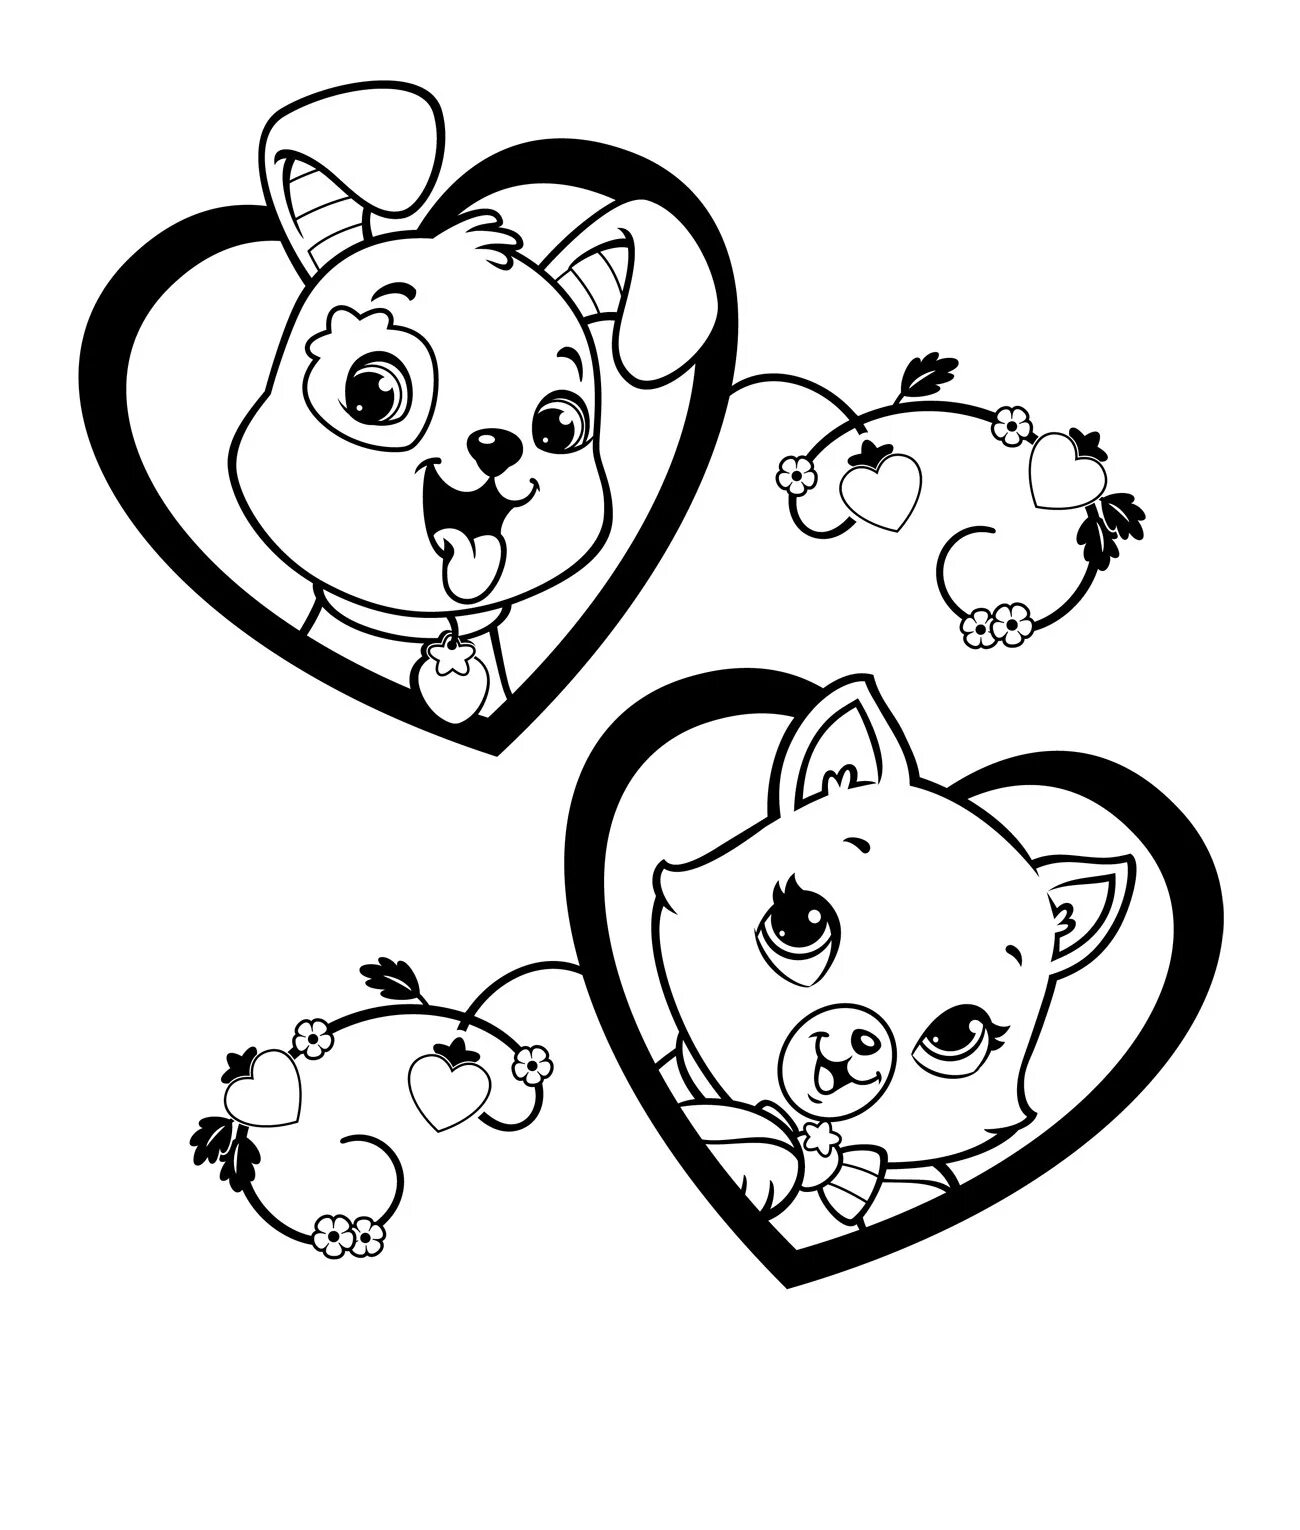 Dog with a heart #4